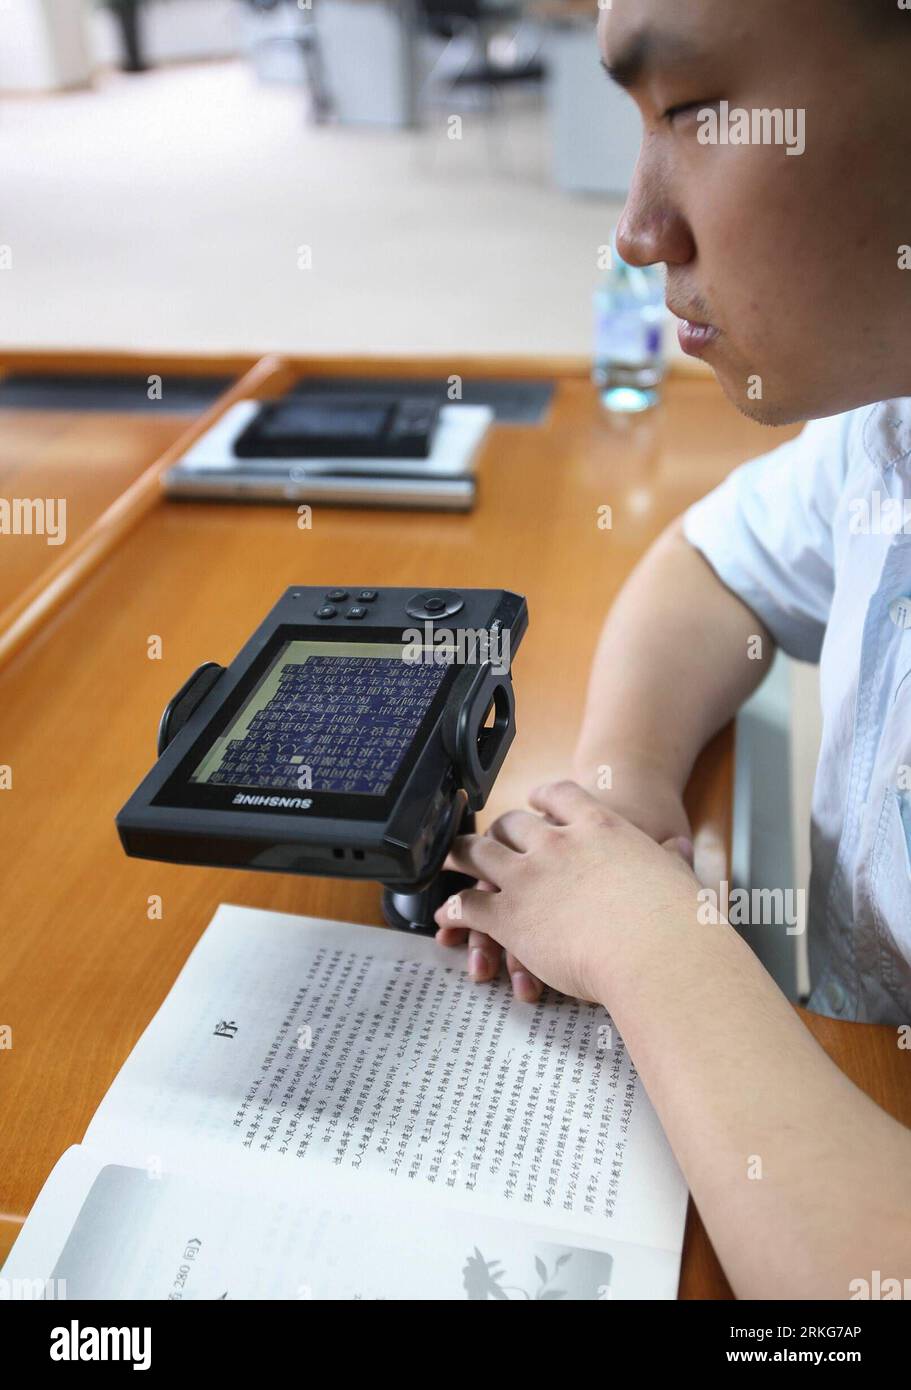 Bildnummer: 55560215  Datum: 30.06.2011  Copyright: imago/Xinhua (110630) -- BEIJING, June 30, 2011 (Xinhua) -- A visually impaired man reads a book by a special reading device that contains a scanner and a speaker at the Chinese National Library for the Blind in Beijing, China, June 30, 2011. The Beijing-based Chinese National Library for the Blind opened a new location on Tuesday. The new location has 28,000 square meters and is divided into many sections that include training and exhibition areas. The new library boasts a collection of over 50,000 Braille books, large-lettered books and aud Stock Photo